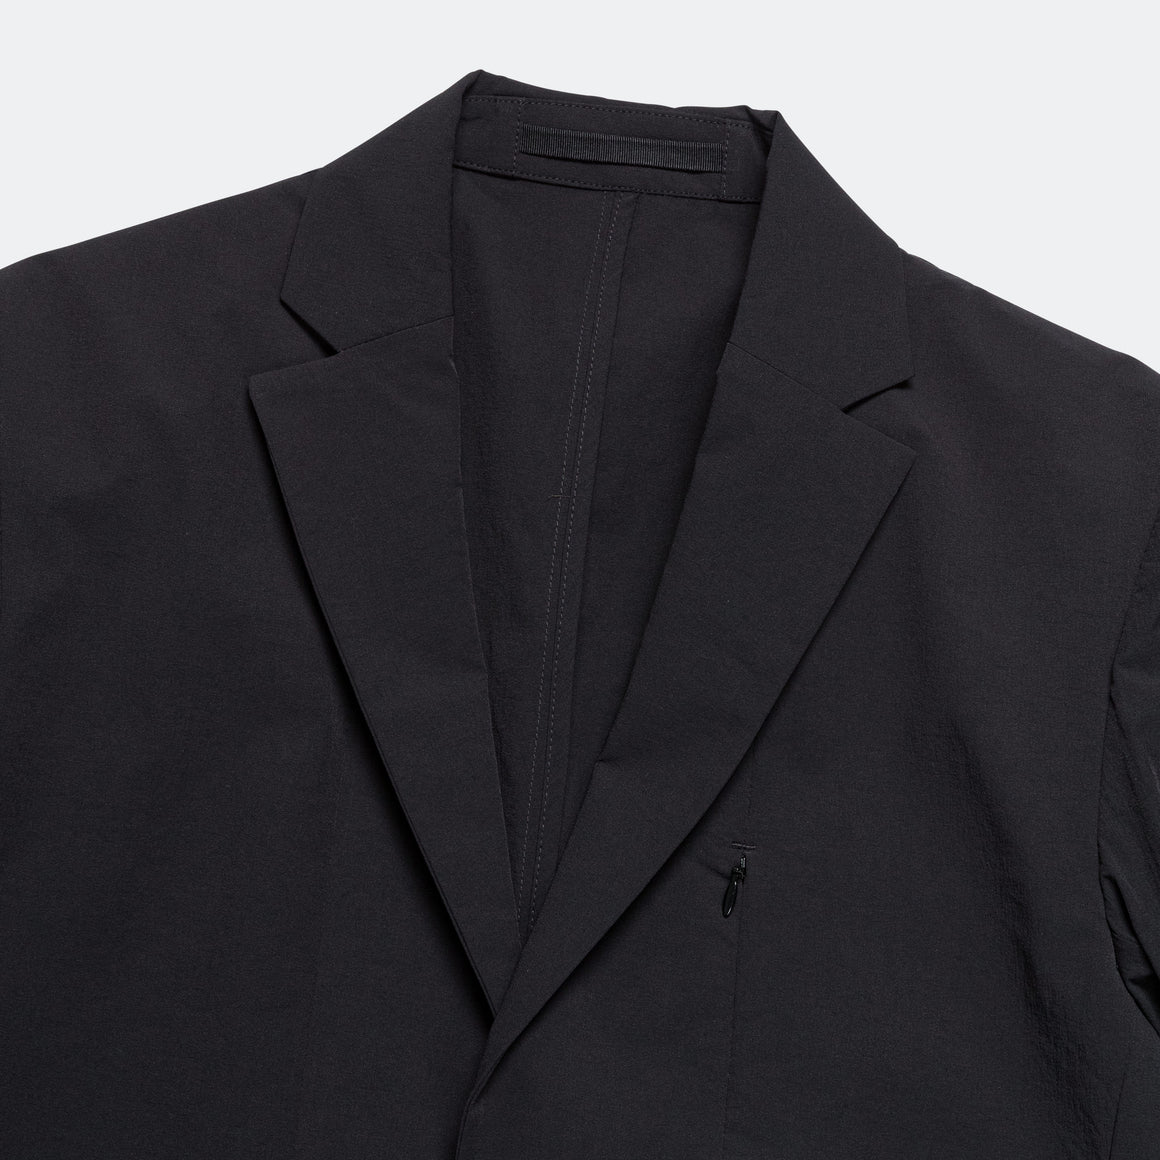 Norse Projects - Emil Travel Light - Black - UP THERE